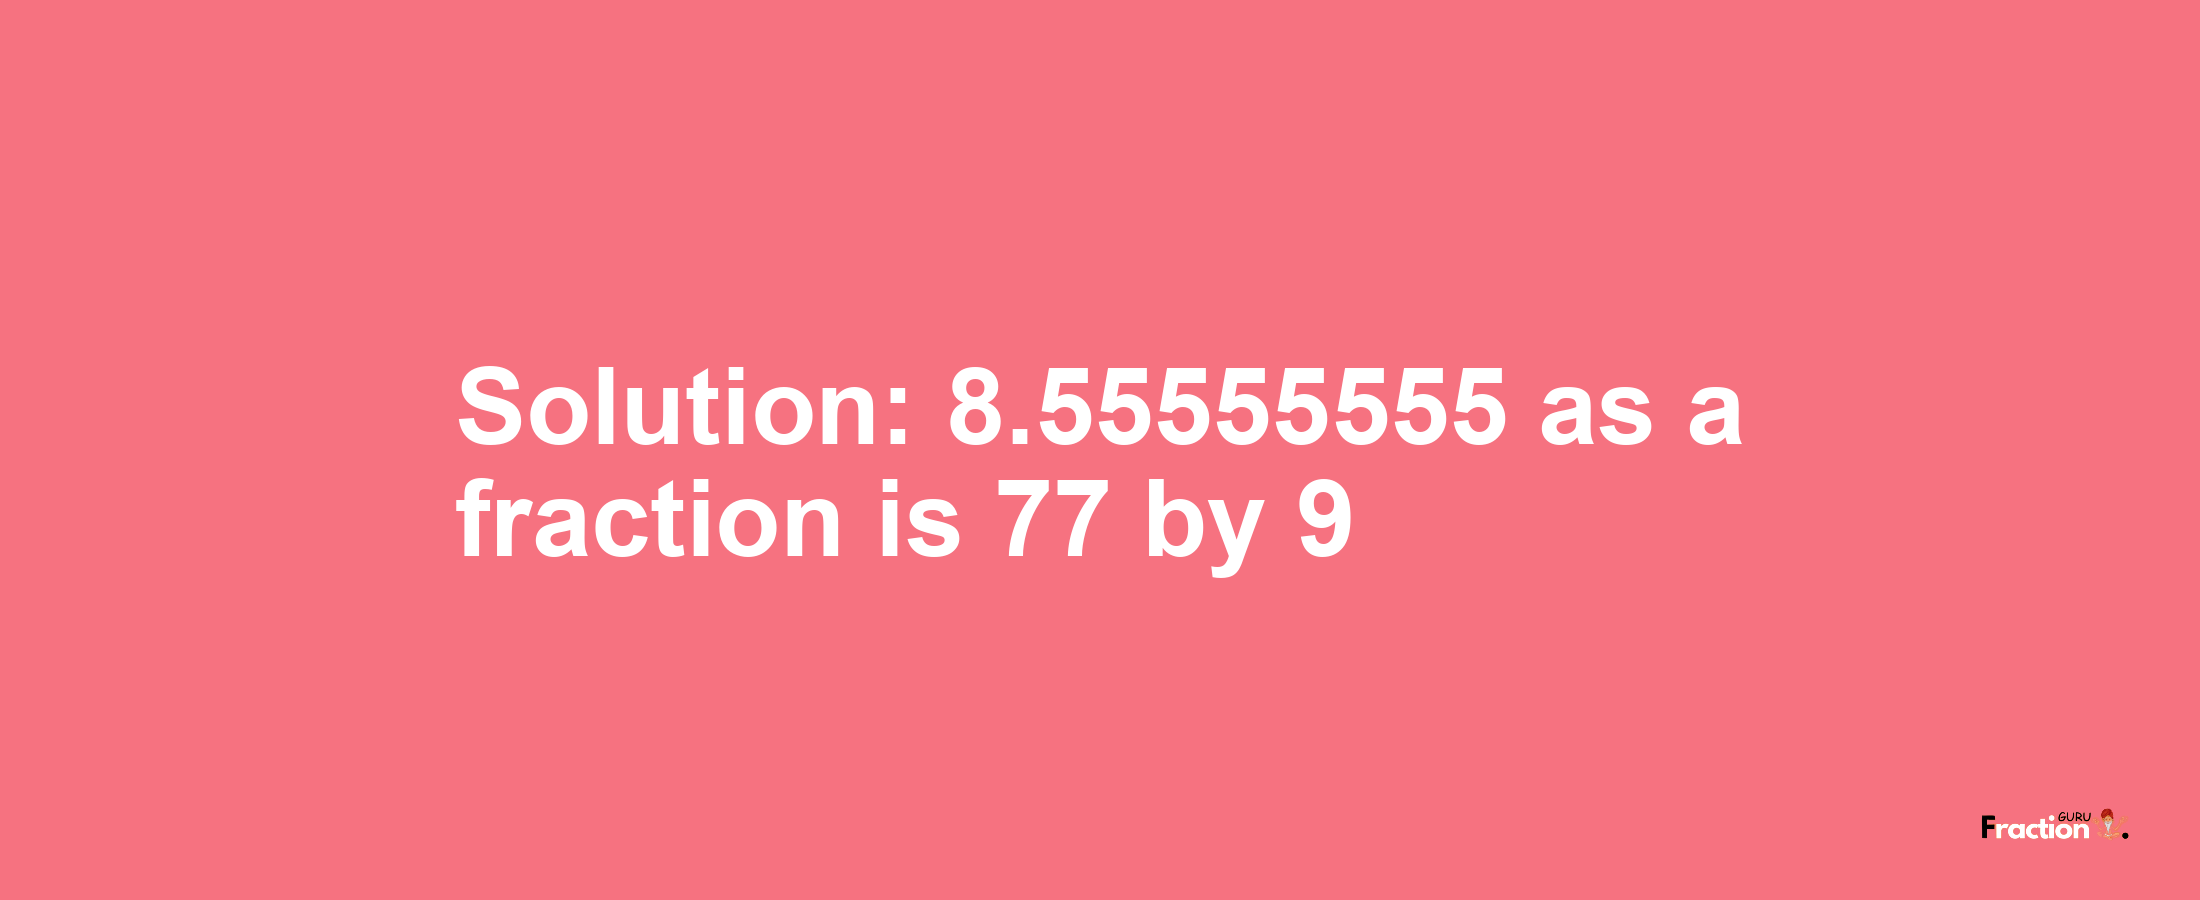 Solution:8.55555555 as a fraction is 77/9